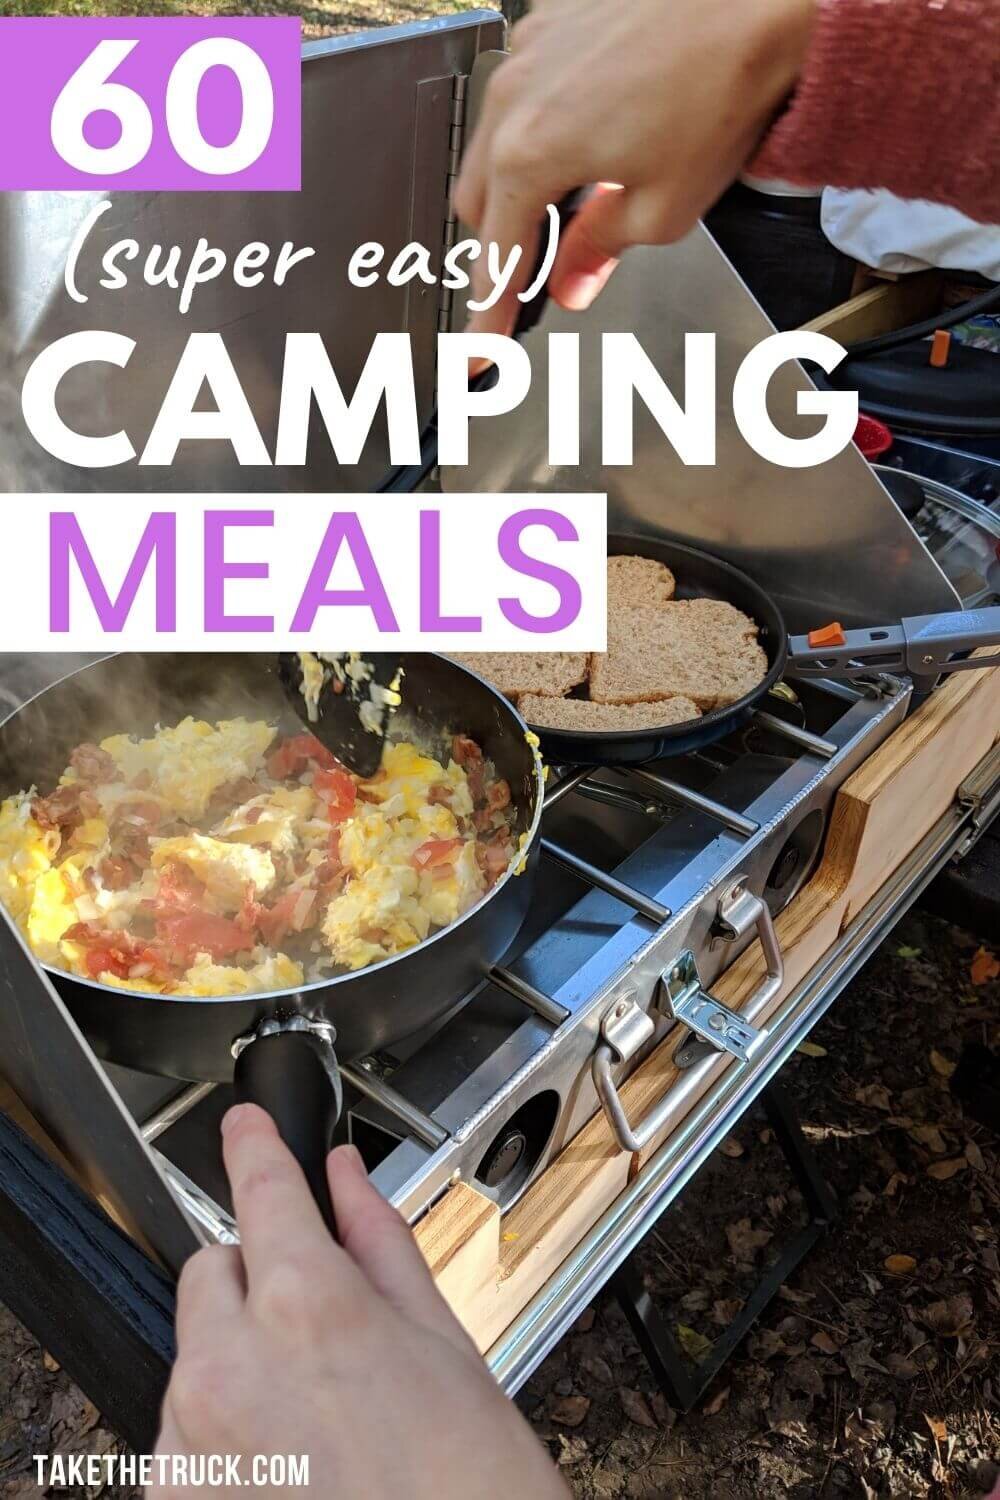 60 different simple camping food and meal ideas! Easy camping breakfasts, lunches, easy camping dinners, plus sides, camping snacks, and desserts - all either make ahead or no cook.